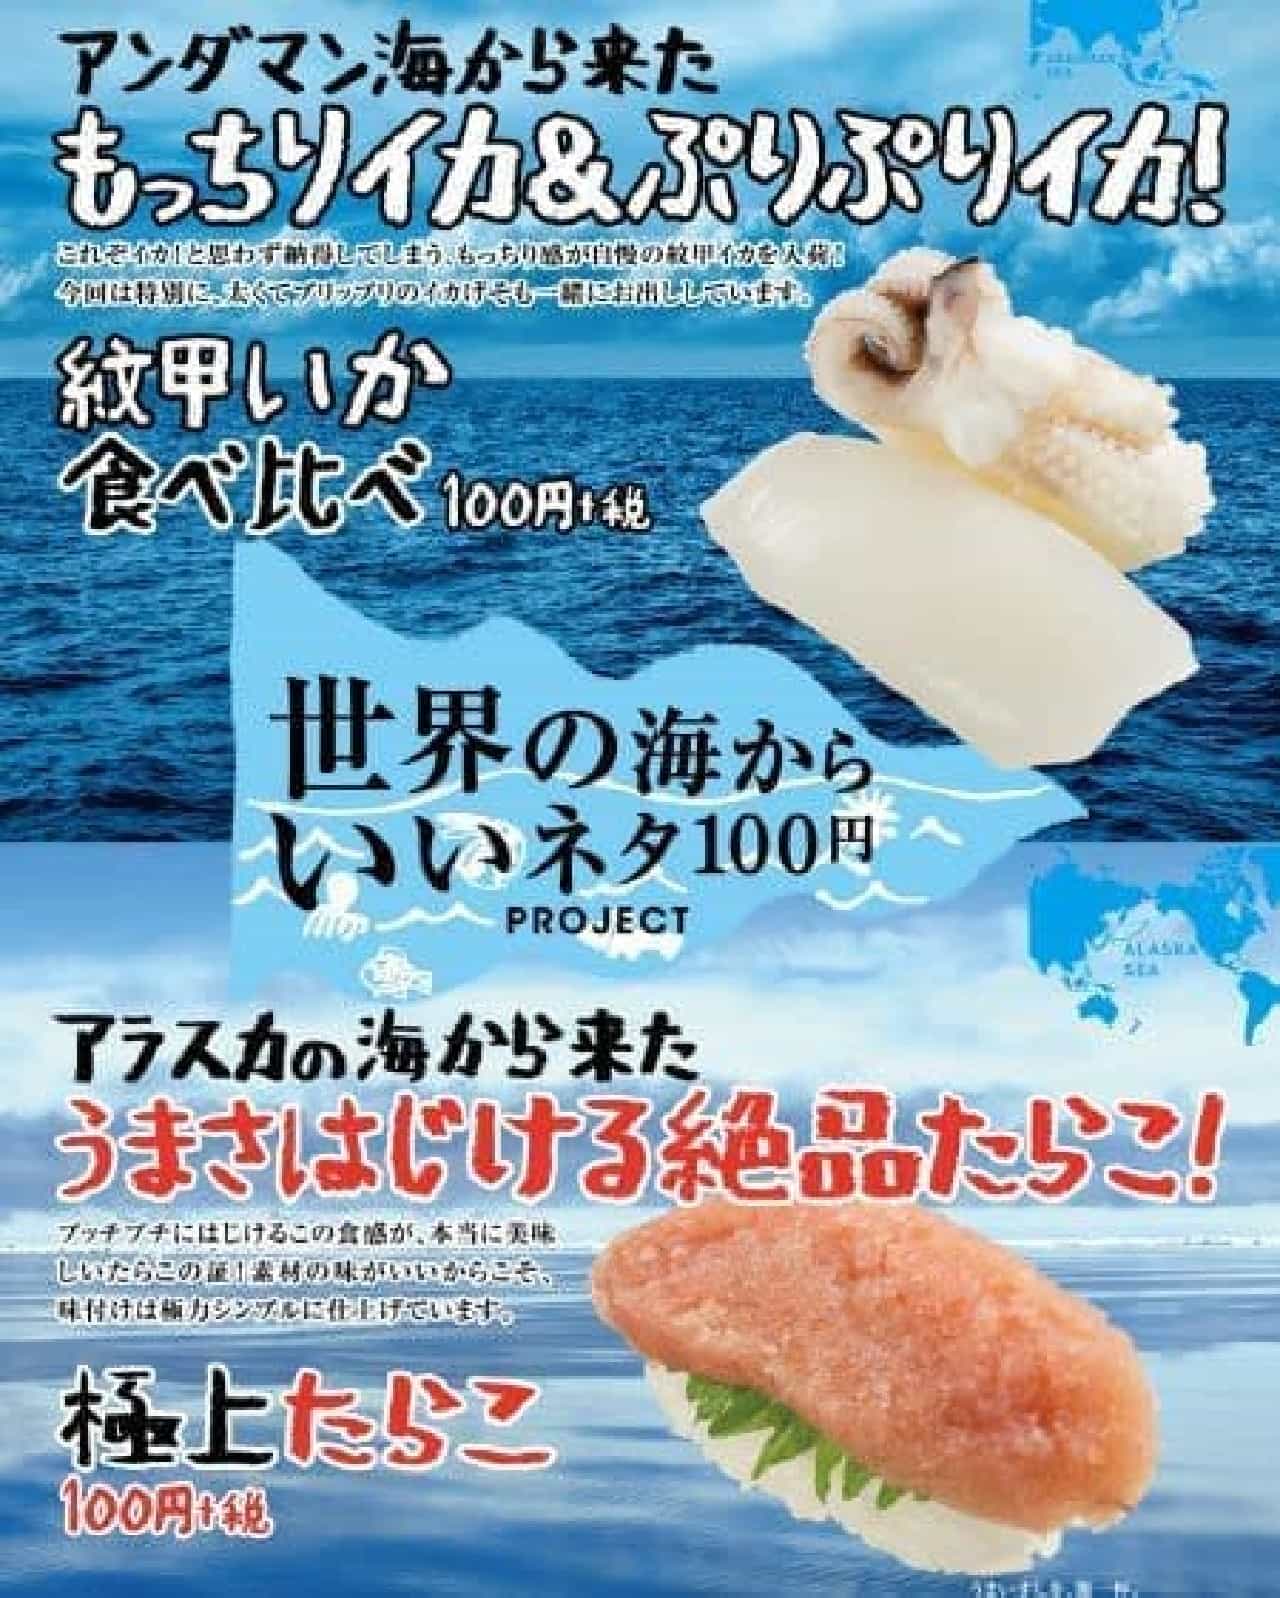 Sushiro "Comparison of eating squid with crest" & "Best cod roe"